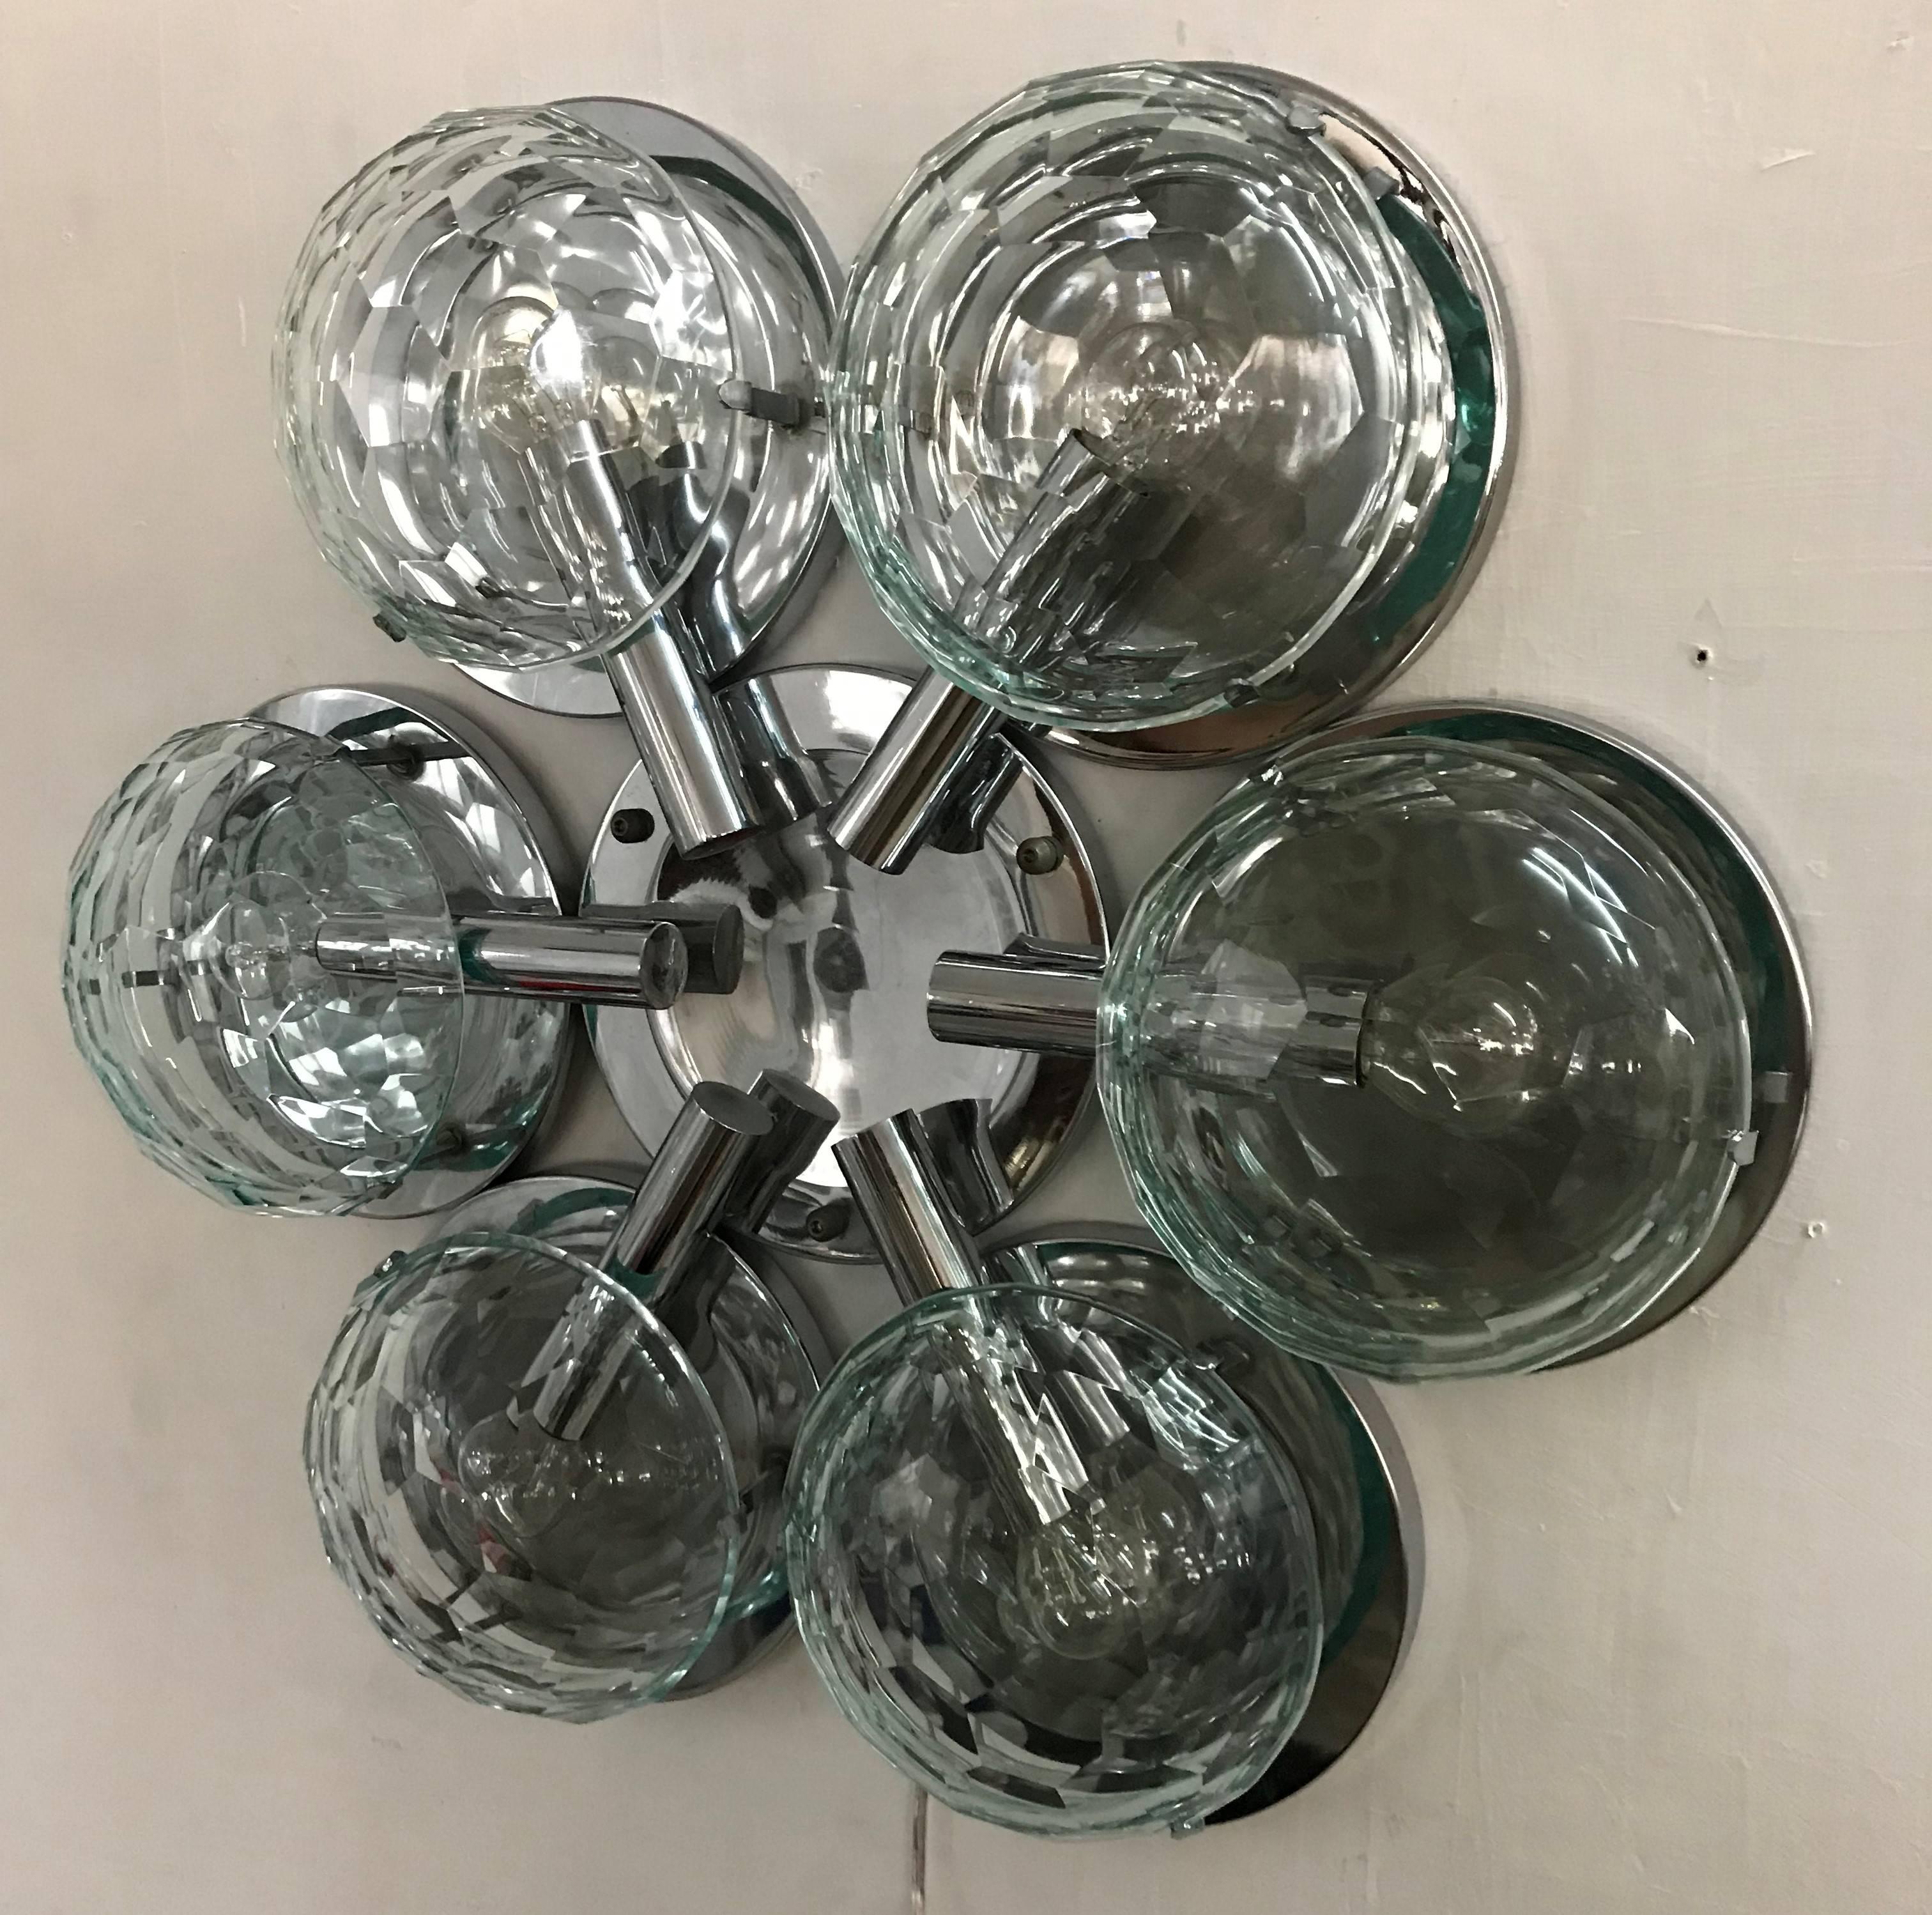 Multifaceted Six-Light Flush Mount by Pia Guidetti Crippa for Lumi, circa 1960 In Good Condition For Sale In Merida, Yucatan